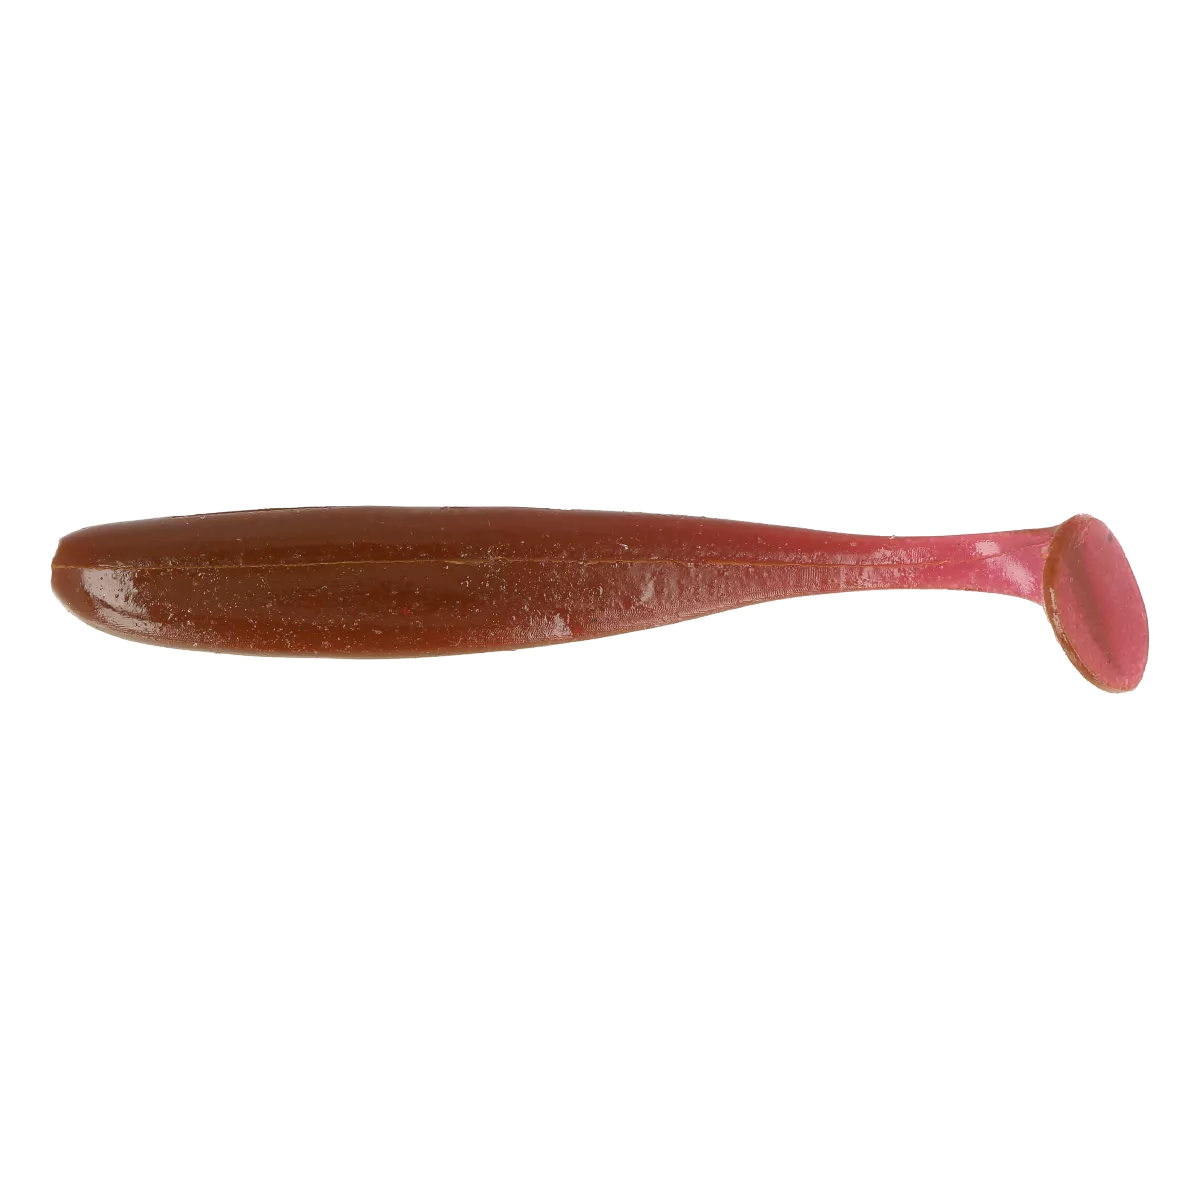 ZEOX Silicone Baits Shemi Shad 3.7in.: check it out on the